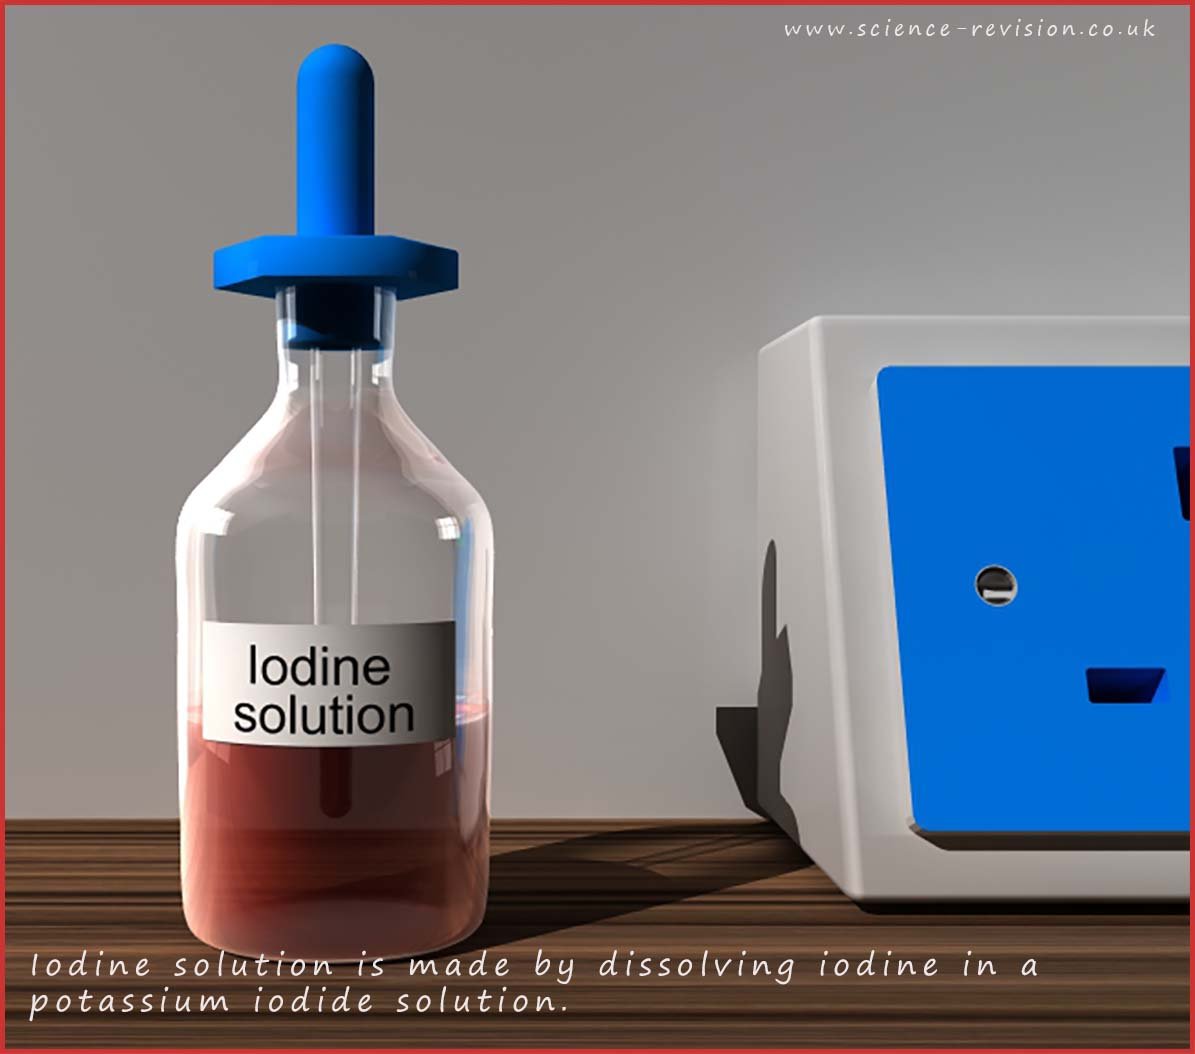 Iodine solution is made by dissolving iodine in a potassium iodide solution.